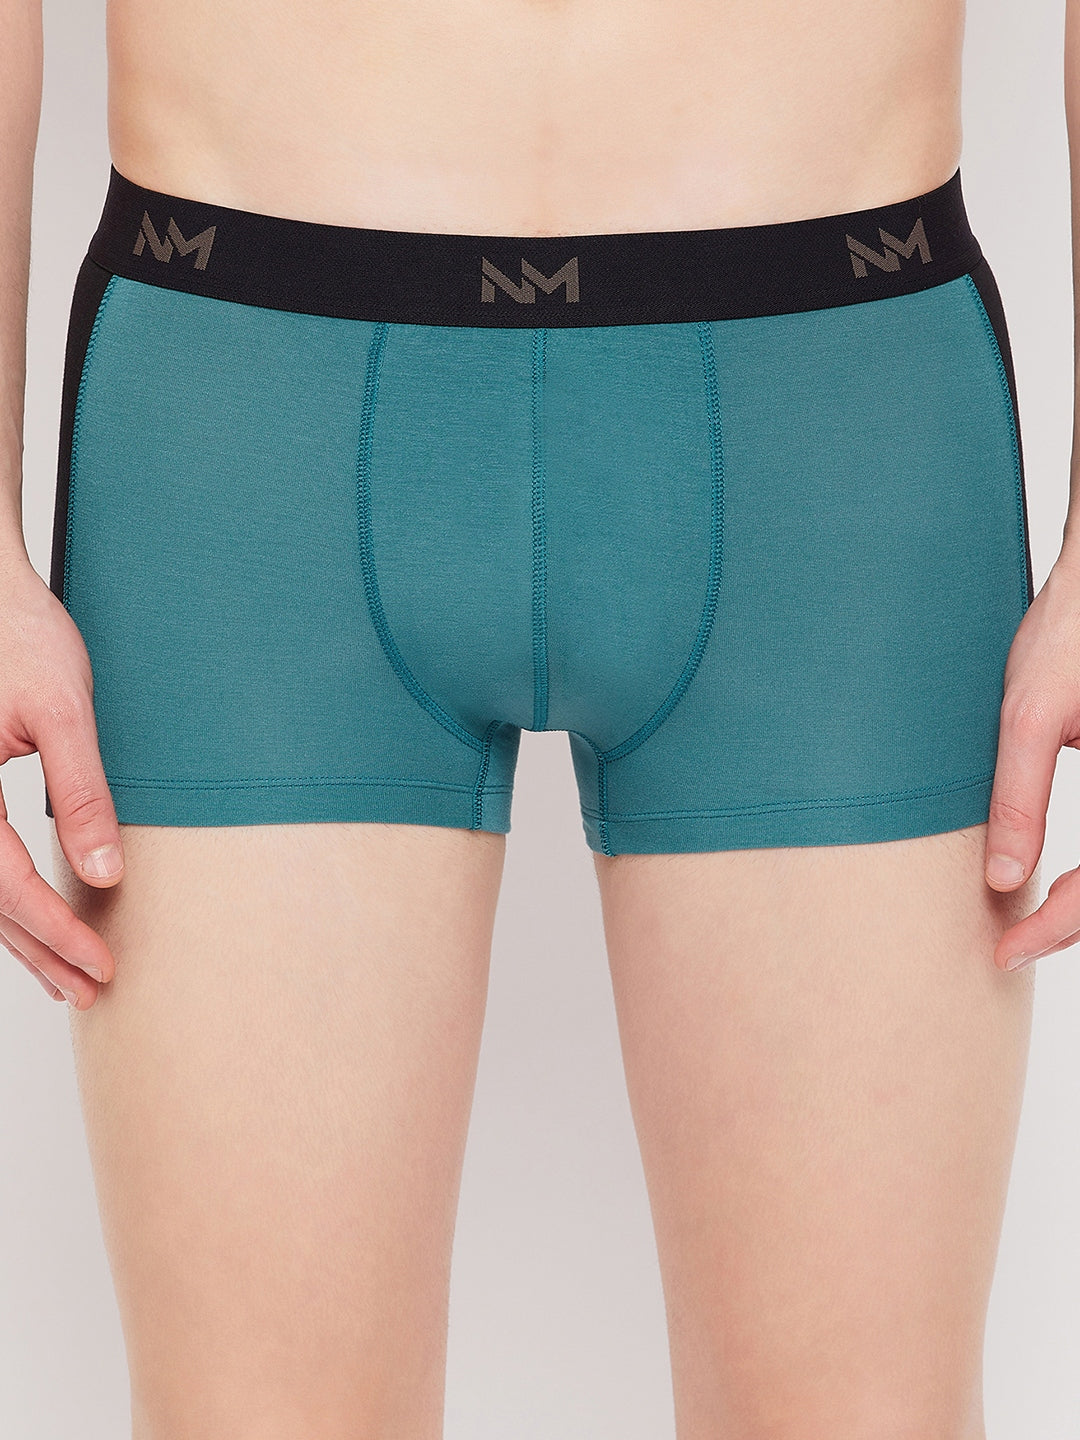 Neva Modal Solid Short Trunk Underwear for Men- Olive, Sea Green, Silver Grey Collection (Pack of 3)